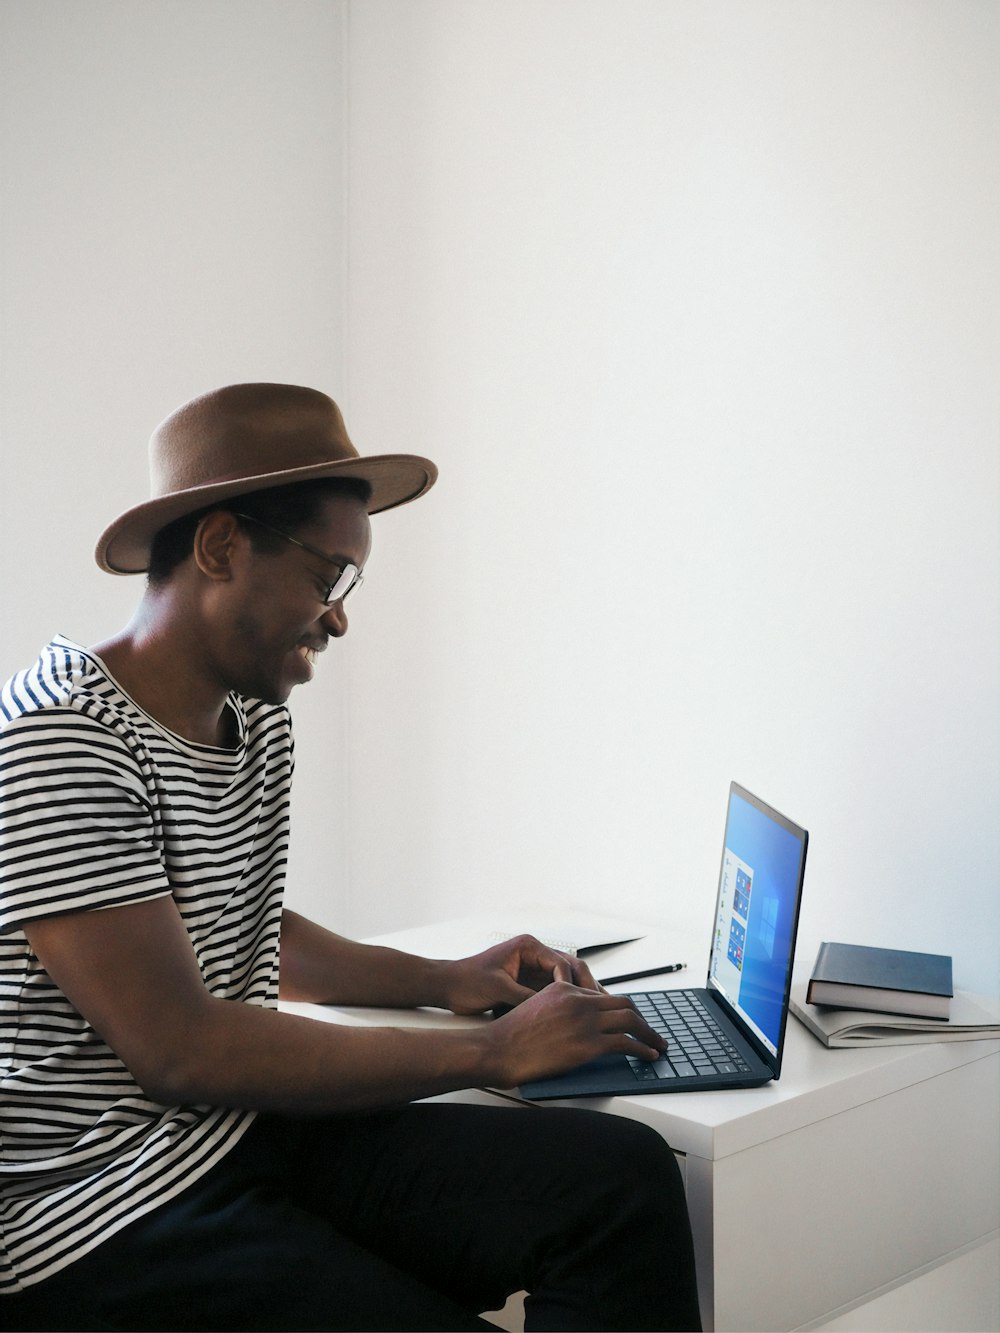 man in white and black striped shirt using microsoft surface cobalt blue laptop computer